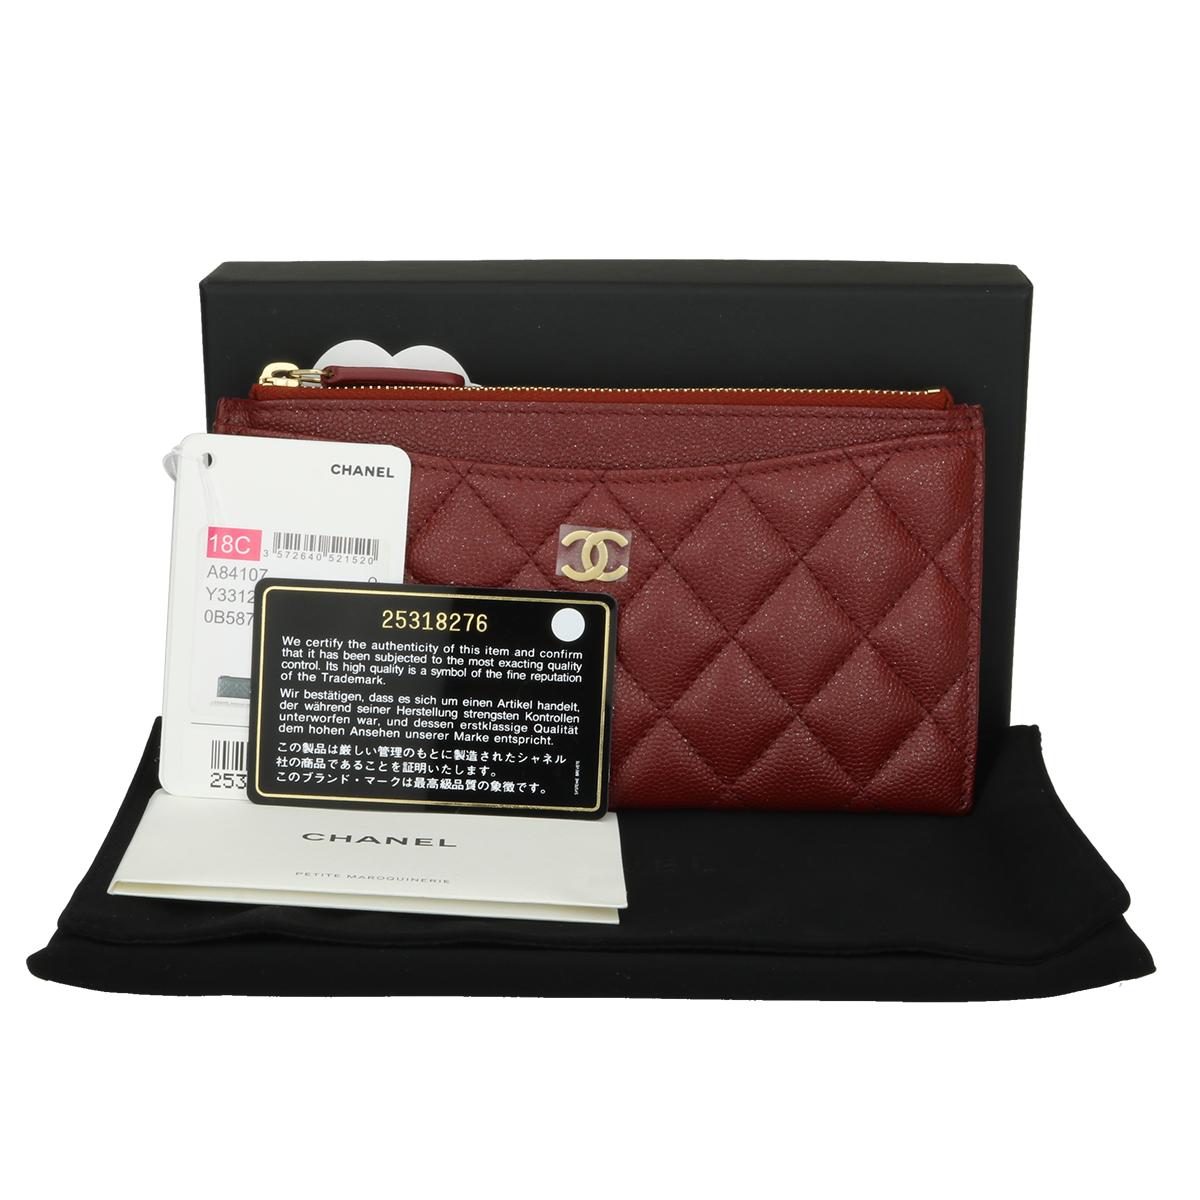 Authentic CHANEL Pouch Burgundy Caviar Iridescent with Brushed Gold Hardware 2018.

This stunning pouch is in Pristine-brand new condition. Extremely difficult to find, and completely sold out everywhere!

Exterior Condition: Brand New

Interior